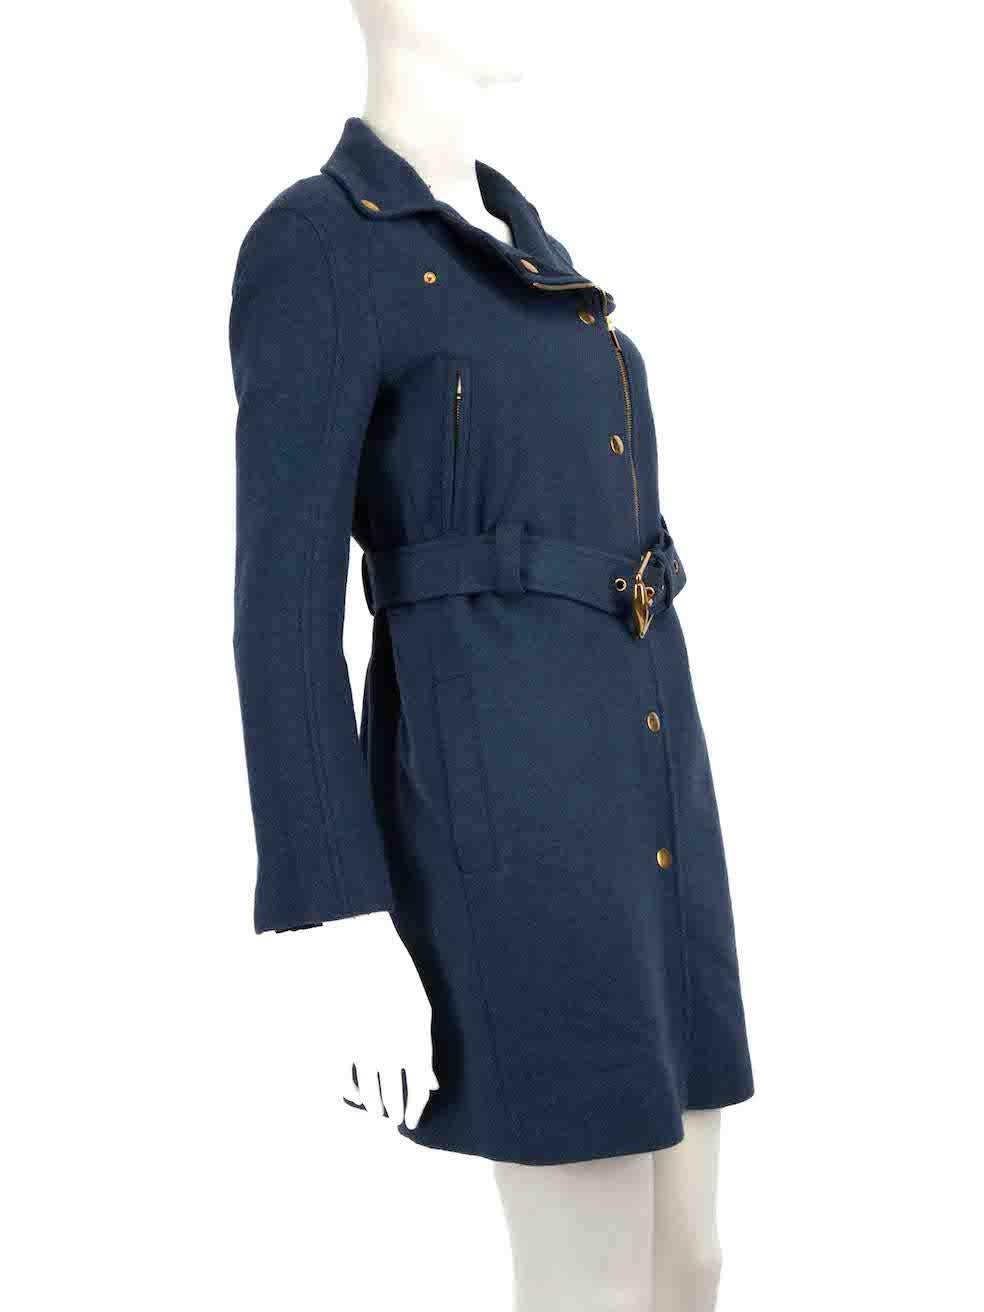 CONDITION is Very good. Minimal wear to coat is evident. Light tarnishing to metal hardware and some bobbling to the side panels underneath the arms on this used Gucci designer resale item.
 
Details
Blue
Wool
Mid length coat
Single breasted with